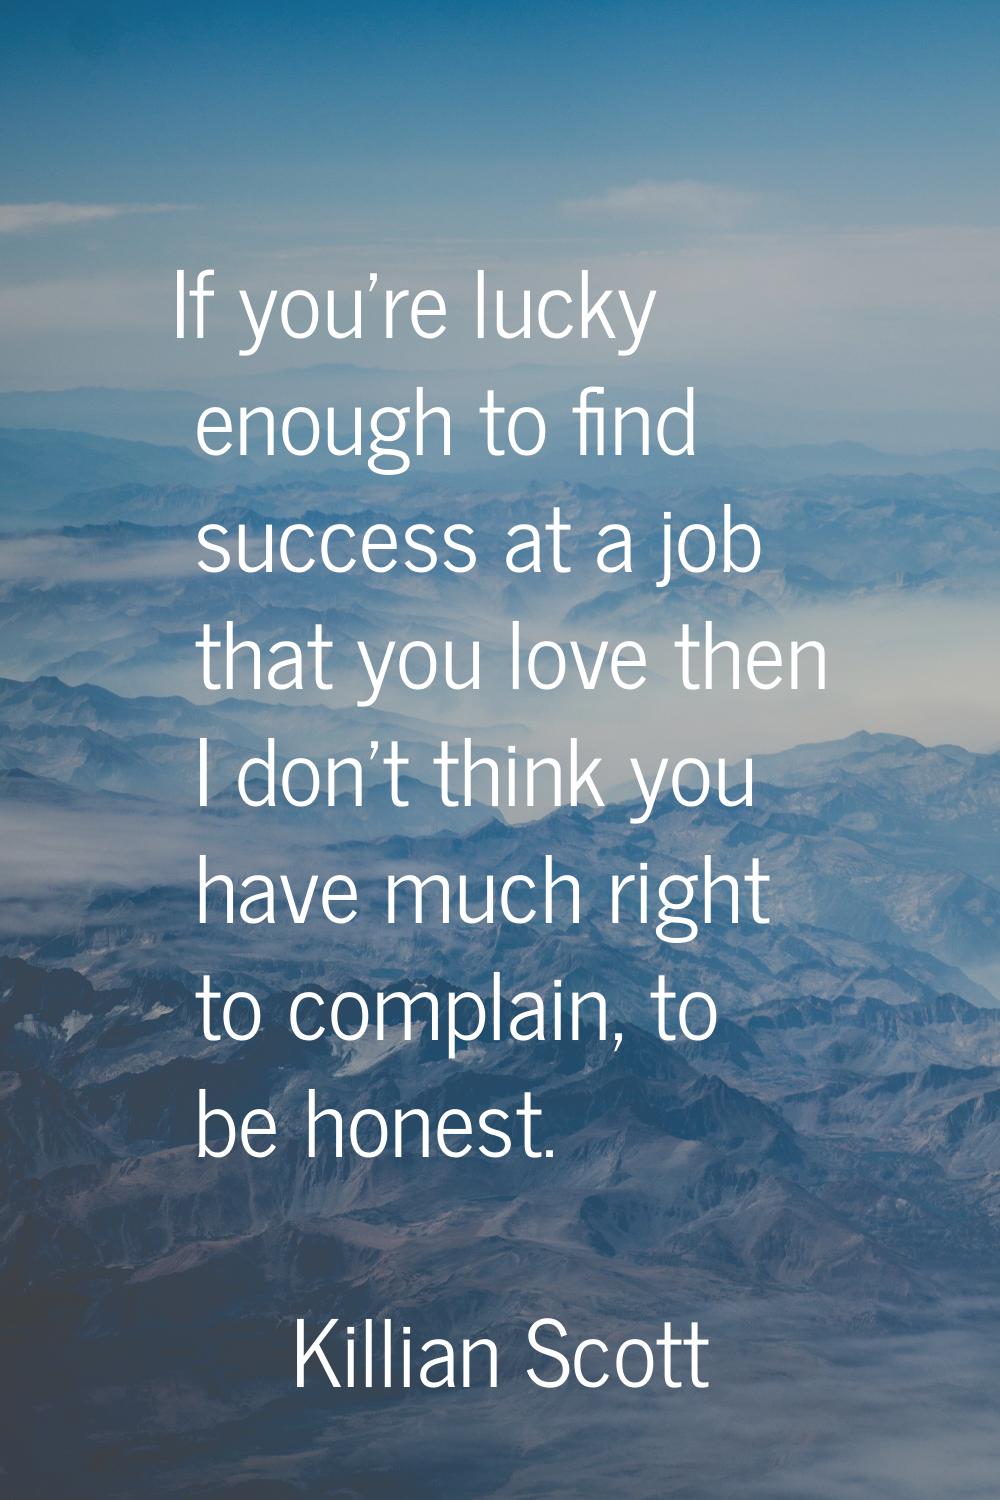 If you’re lucky enough to find success at a job that you love then I don’t think you have much righ